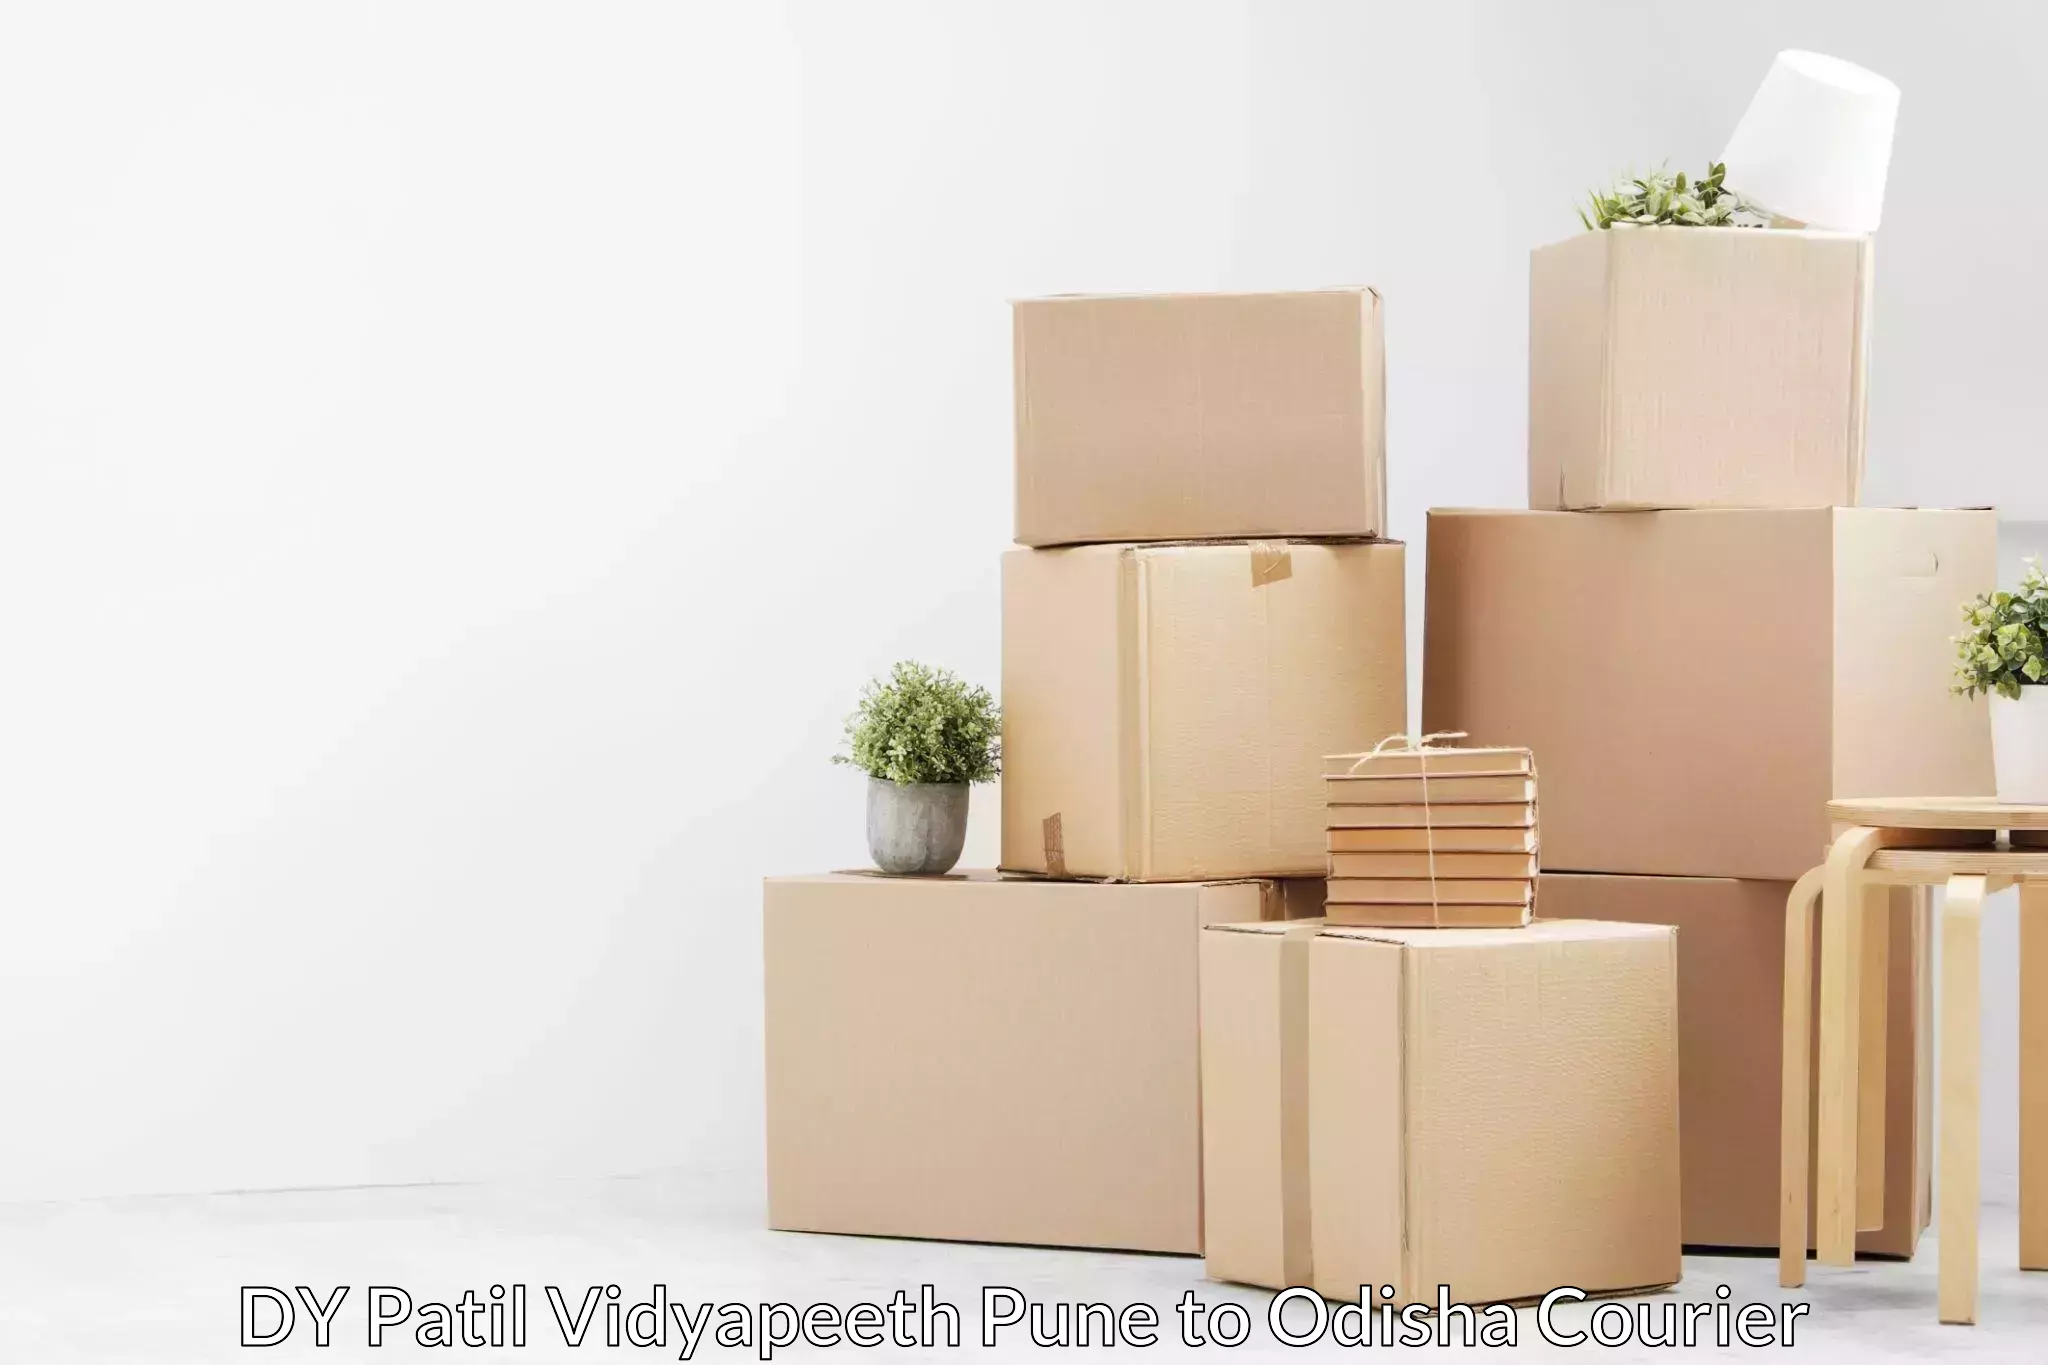 Trusted household movers DY Patil Vidyapeeth Pune to Galleri